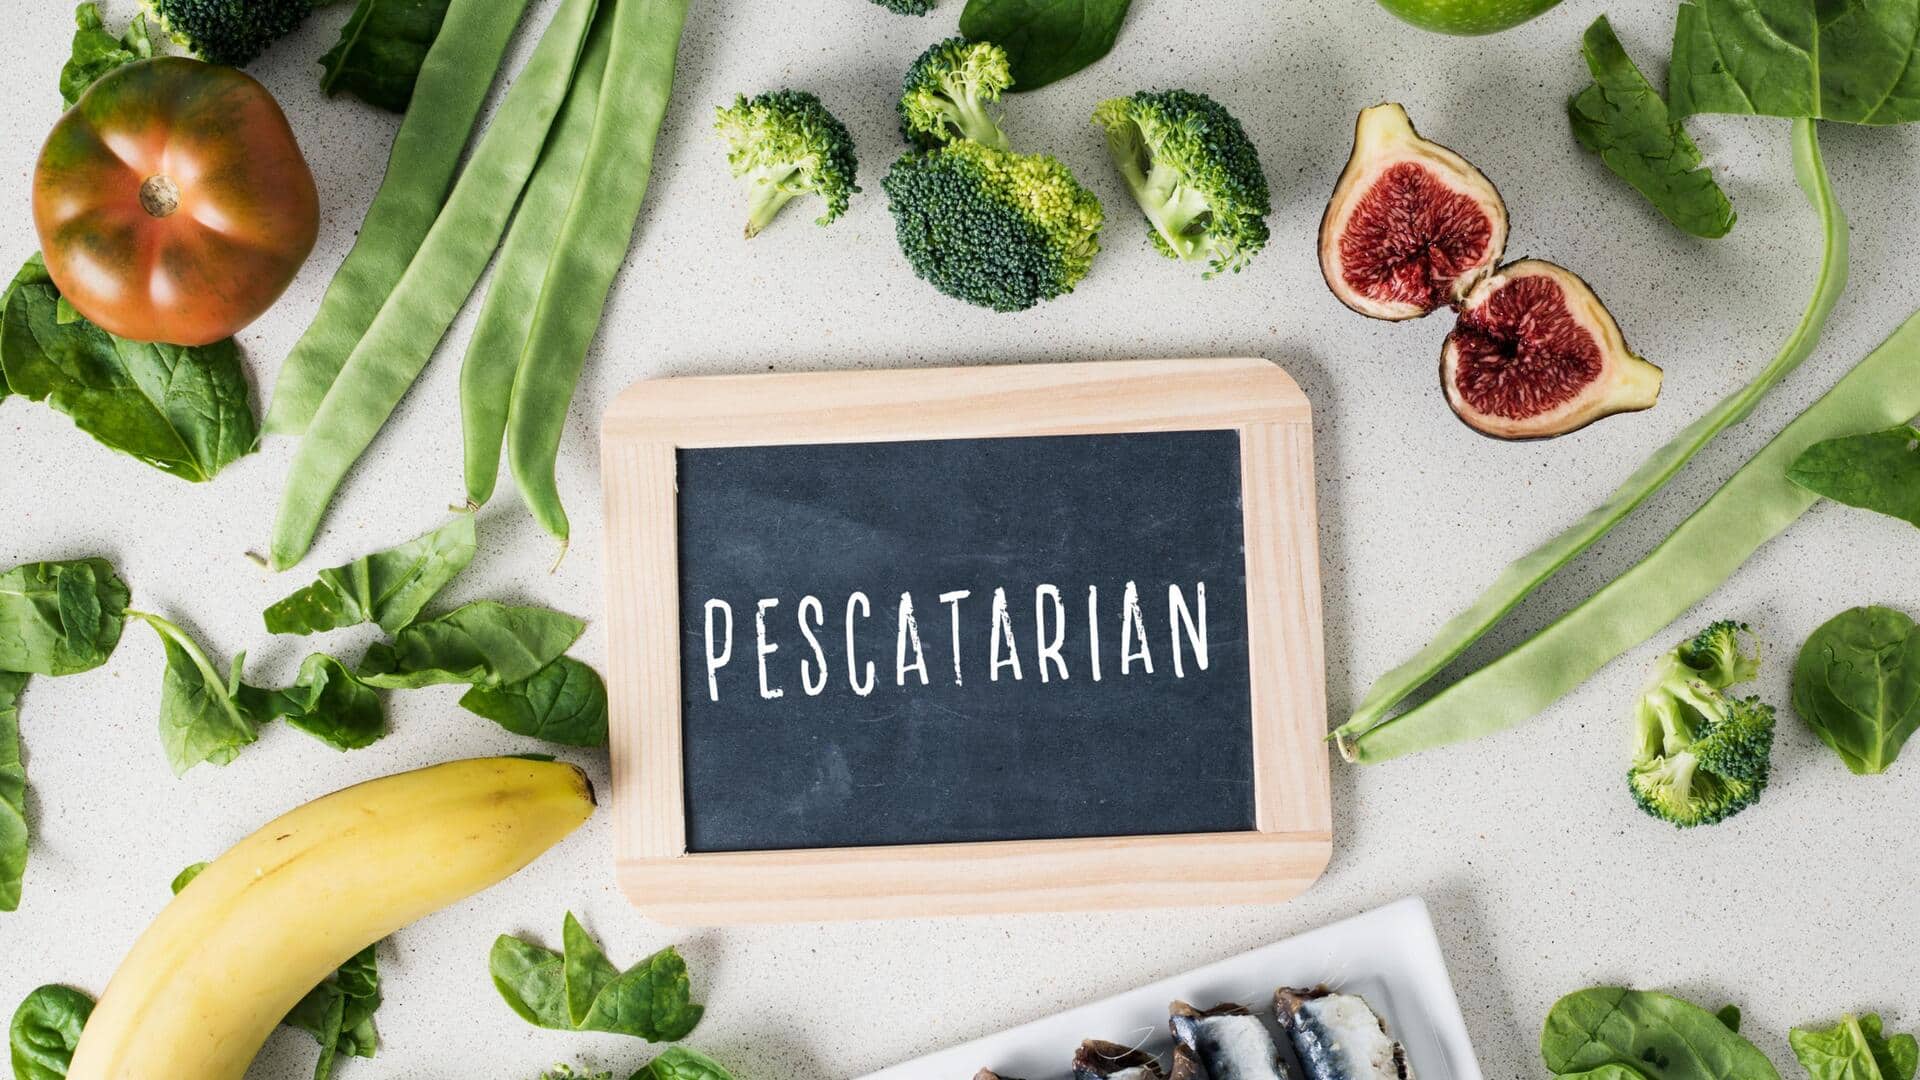 Pescatarian v/s vegetarian diet: What sets them apart